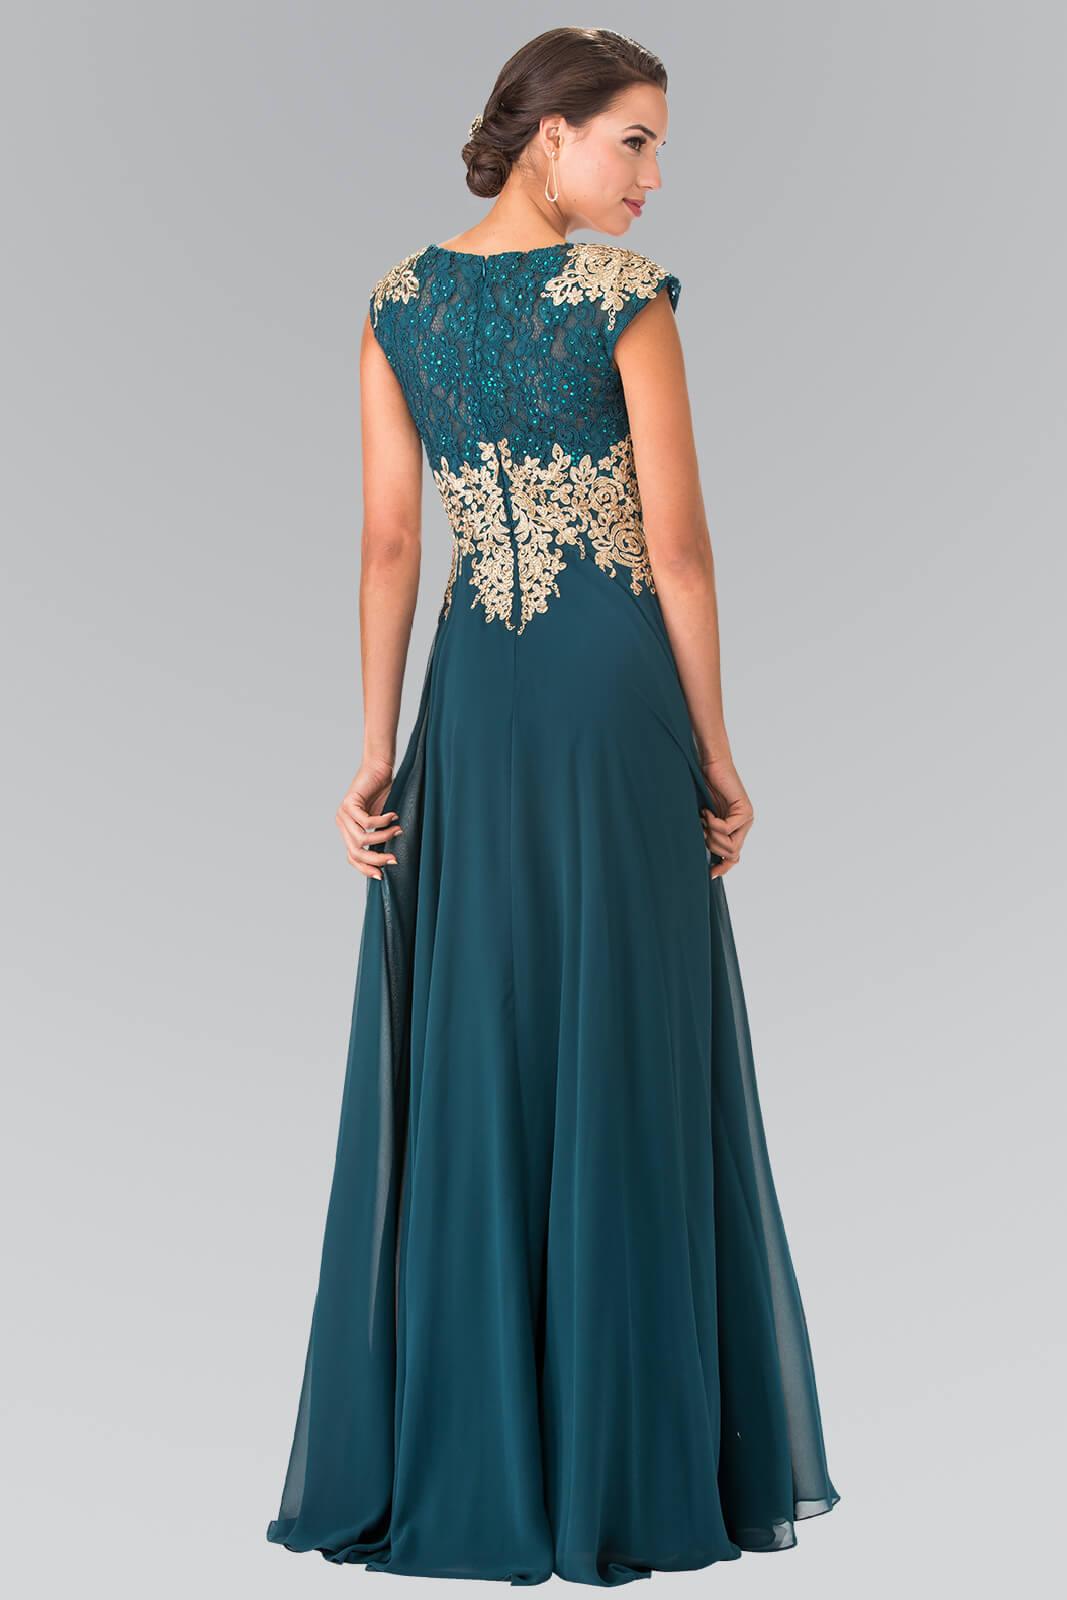 Cap Sleeve Long Prom Dress Evening Gown for $273.99 – The Dress Outlet